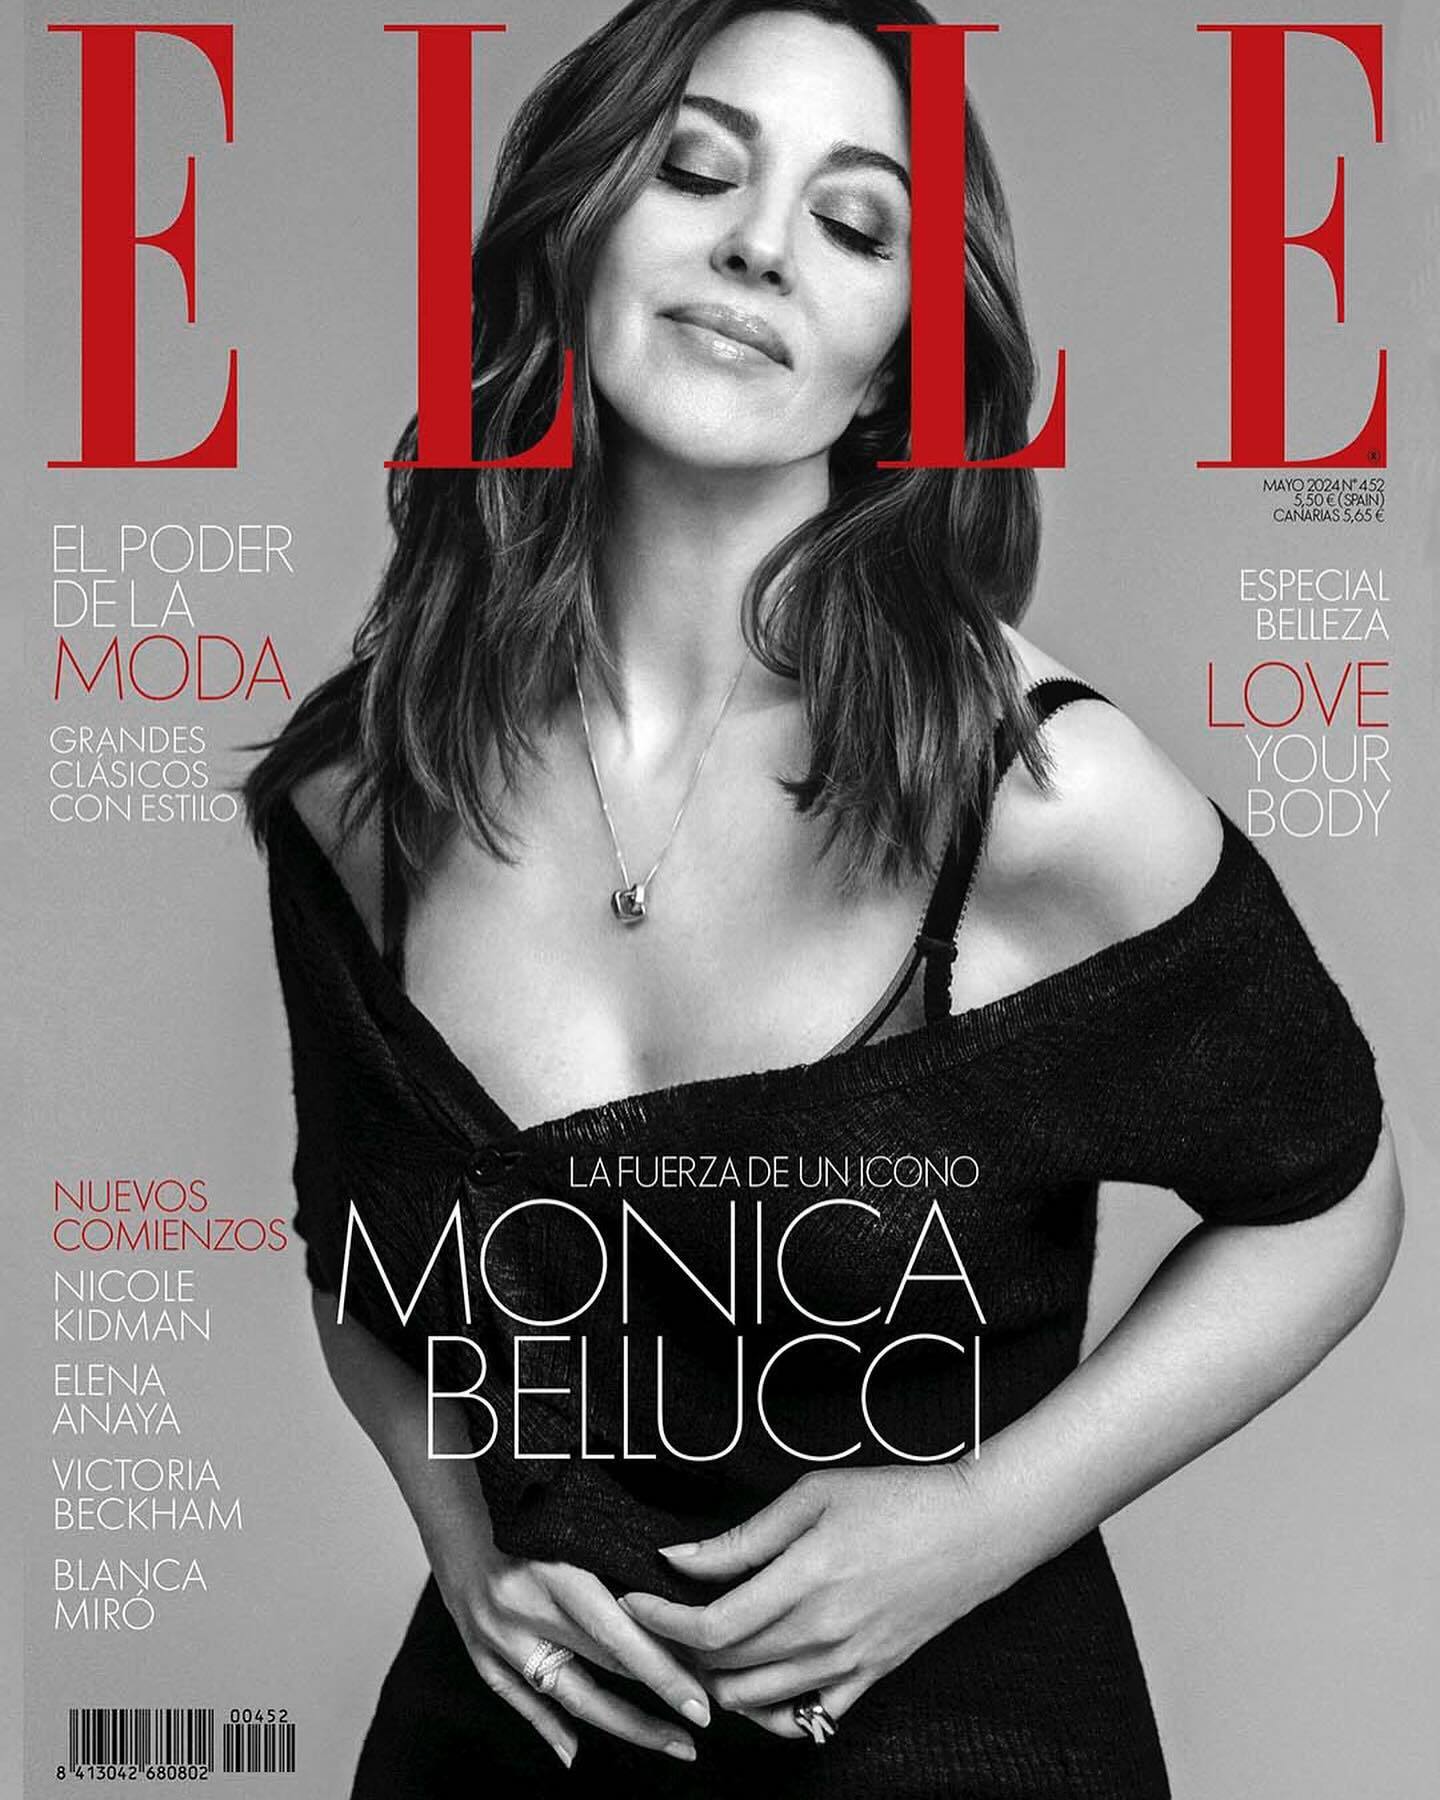 Monica Bellucci appeared on the cover of Elle Spain: the 59-year-old actress was named the most charming woman of the century